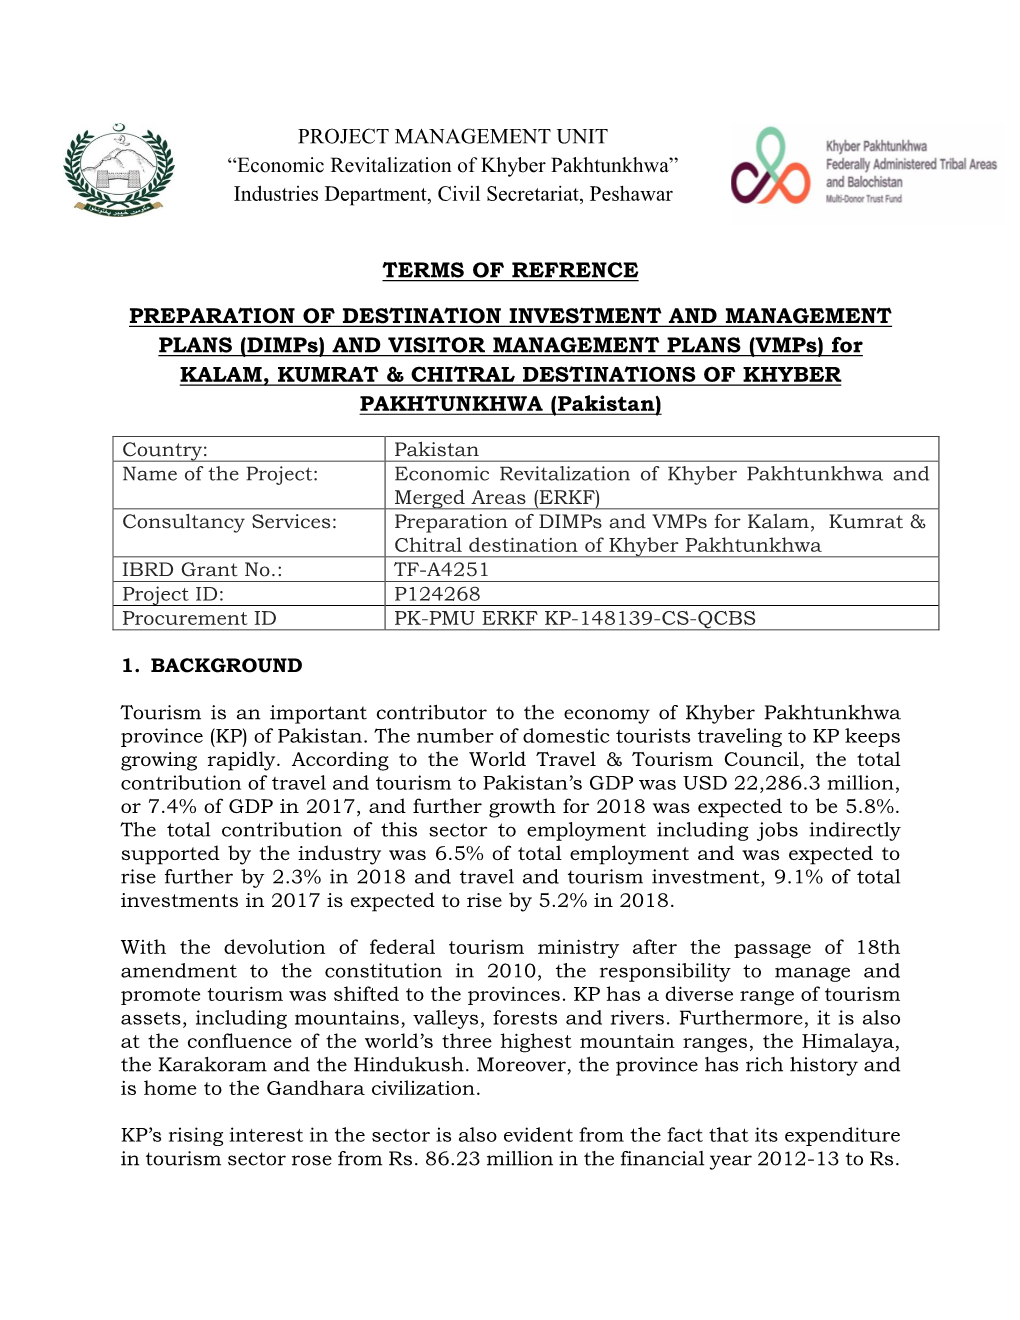 Dimps) and VISITOR MANAGEMENT PLANS (Vmps) for KALAM, KUMRAT & CHITRAL DESTINATIONS of KHYBER PAKHTUNKHWA (Pakistan)